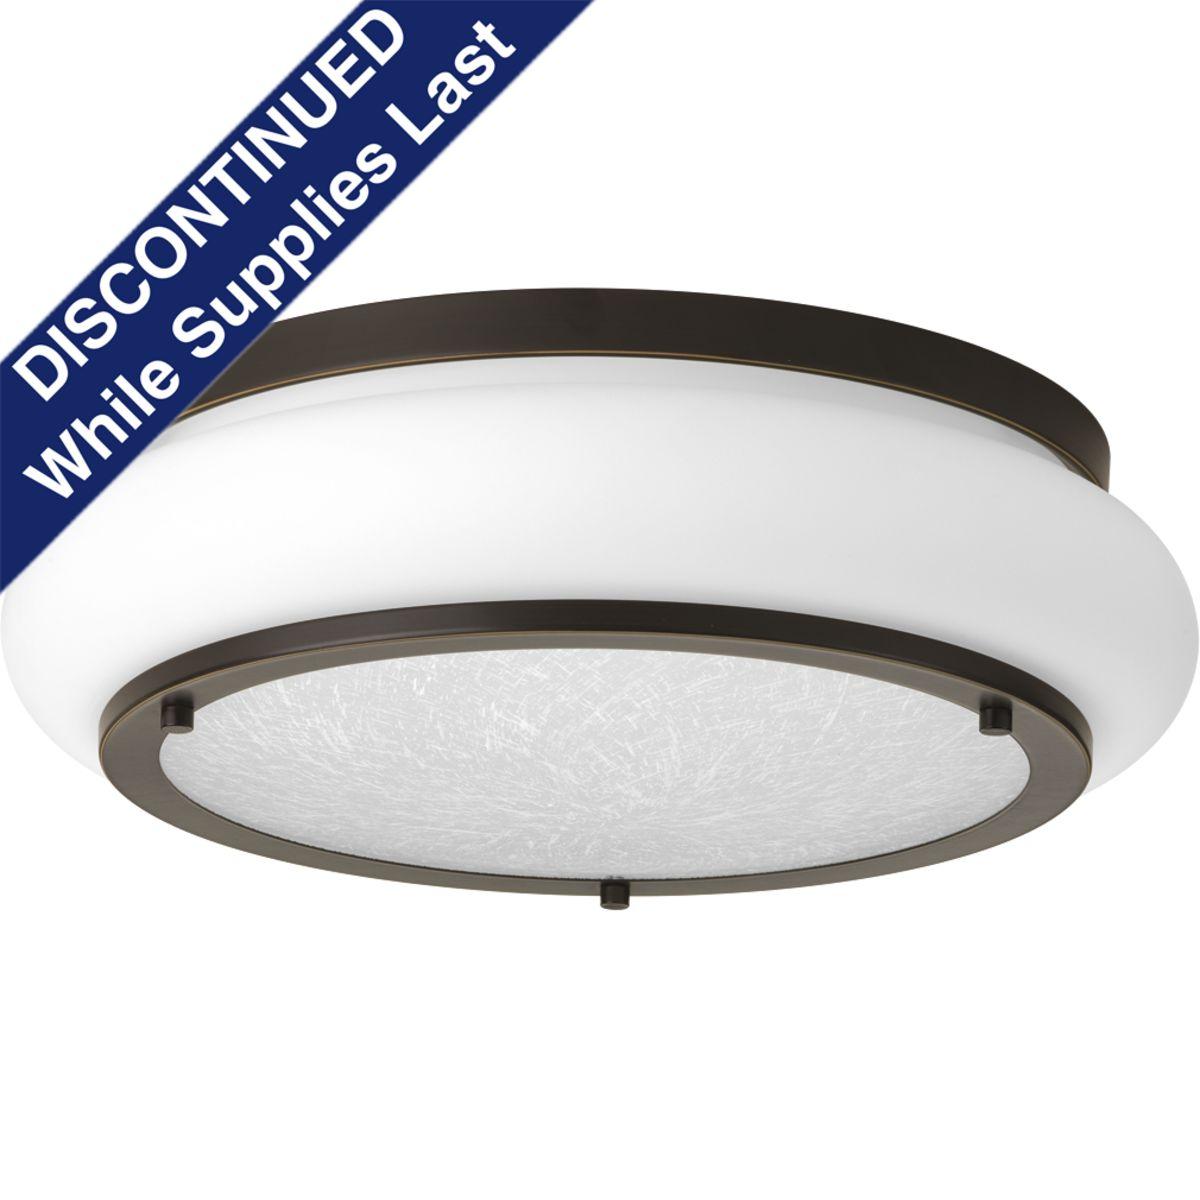 Hubbell P350082-020-30 One-light 15 inch LED flush mount features architectural details for a variety of home styles. A combination of glass textures work together to create an interesting effect for today’s interiors. Metallic finishes complement the opal/linen double glass. A